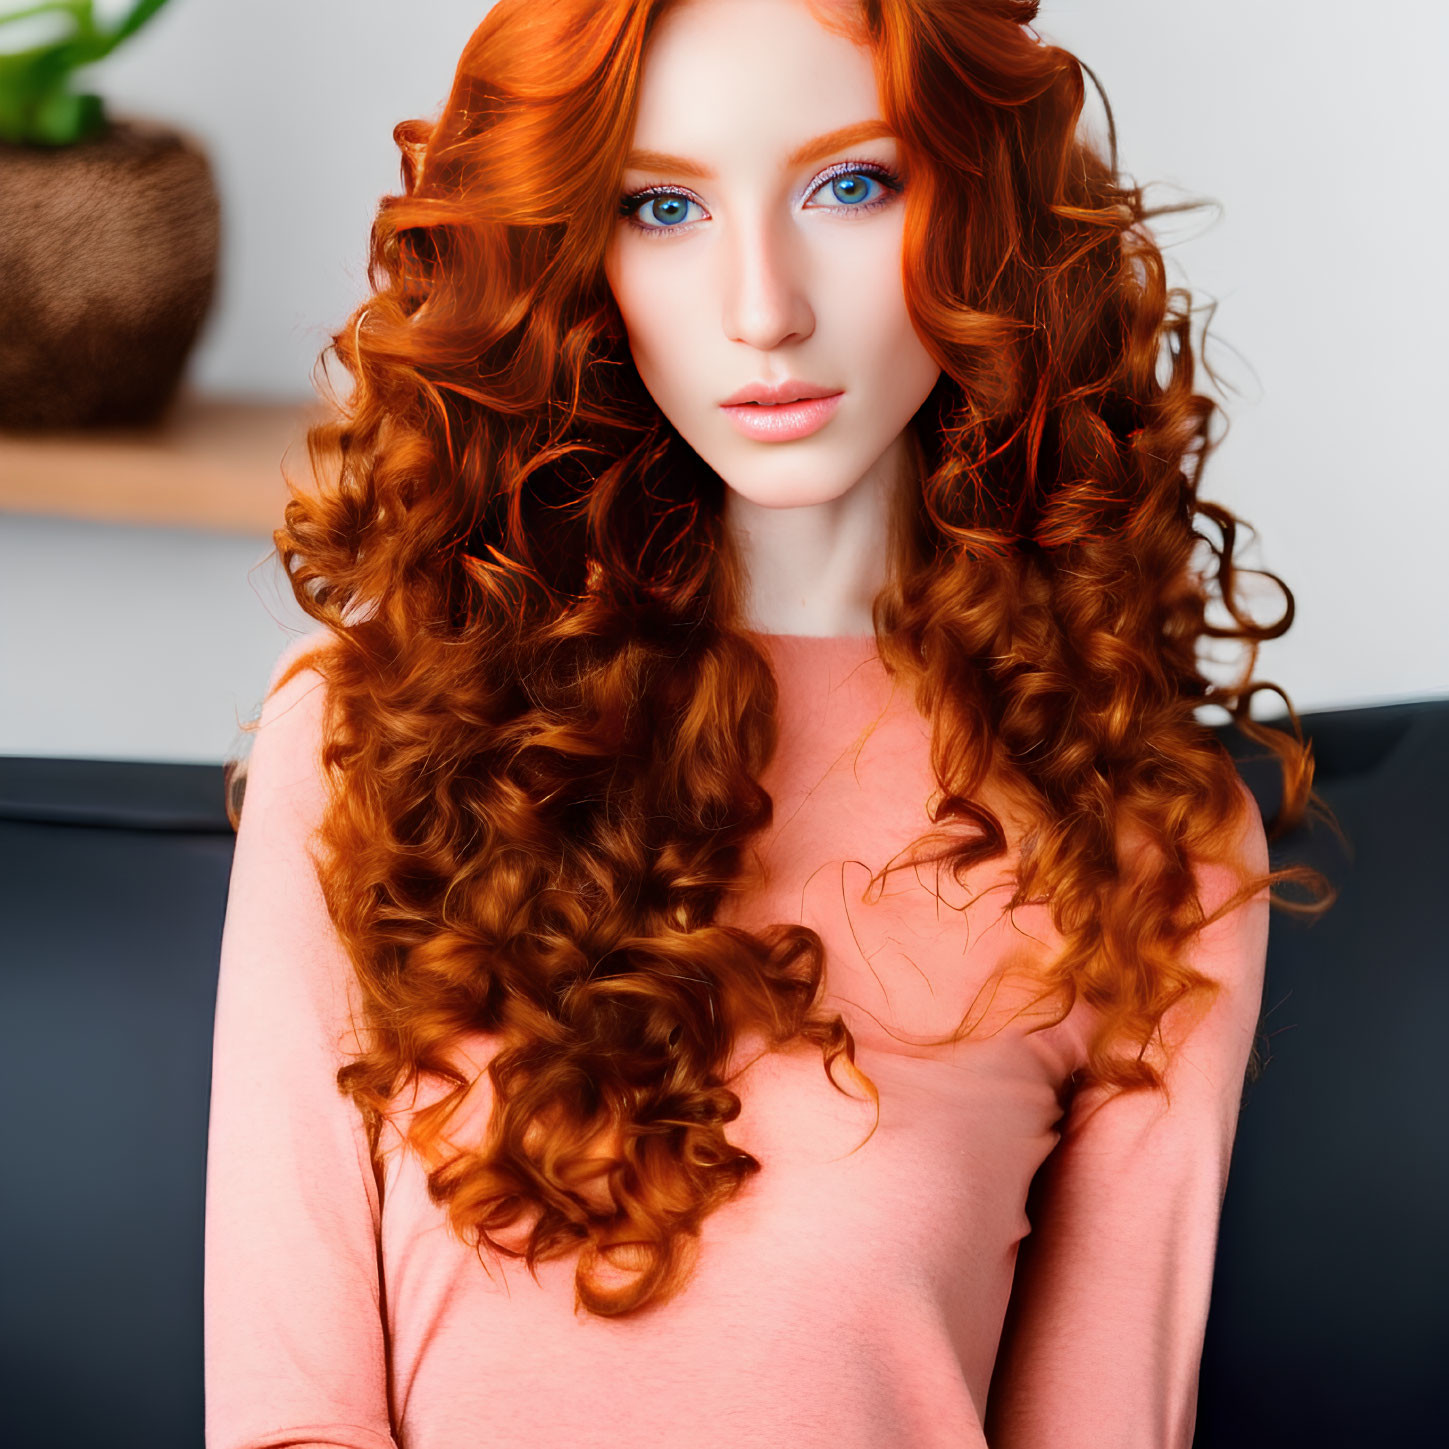 Woman with Long Curly Red Hair and Blue Eyes in Peach Top Sitting Indoors